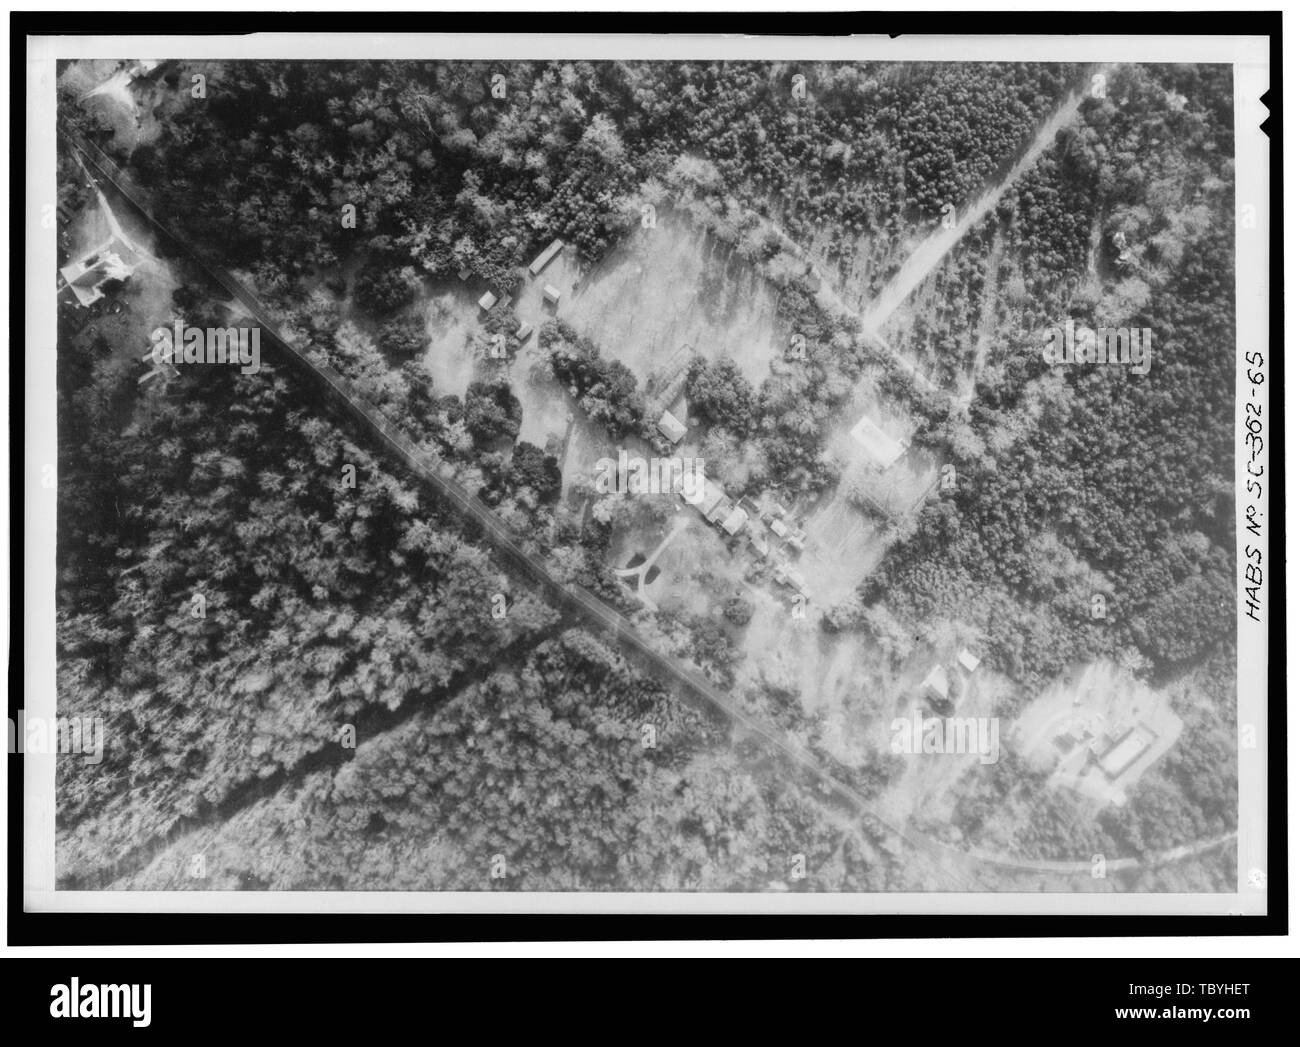 March 1978. Copy of enlargement from original 11Omm blackandwhite aerial negative from Sortie 414, made by United States Air Force, Tactical Reconaissance Wing, Ninth Air Force, at Shaw Air Force Base, Sumter, South Carolina. Overhead aerial view of Borough House with surrounding grounds and adjacent properties.  Borough House, West Side State Route 261, about .1 mile south side of junction with old Garners Ferry Road, Stateburg, Sumter County, SC Cornwallis Greene Cary, Brian, transmitter Price, Virginia B, transmitter Stock Photo